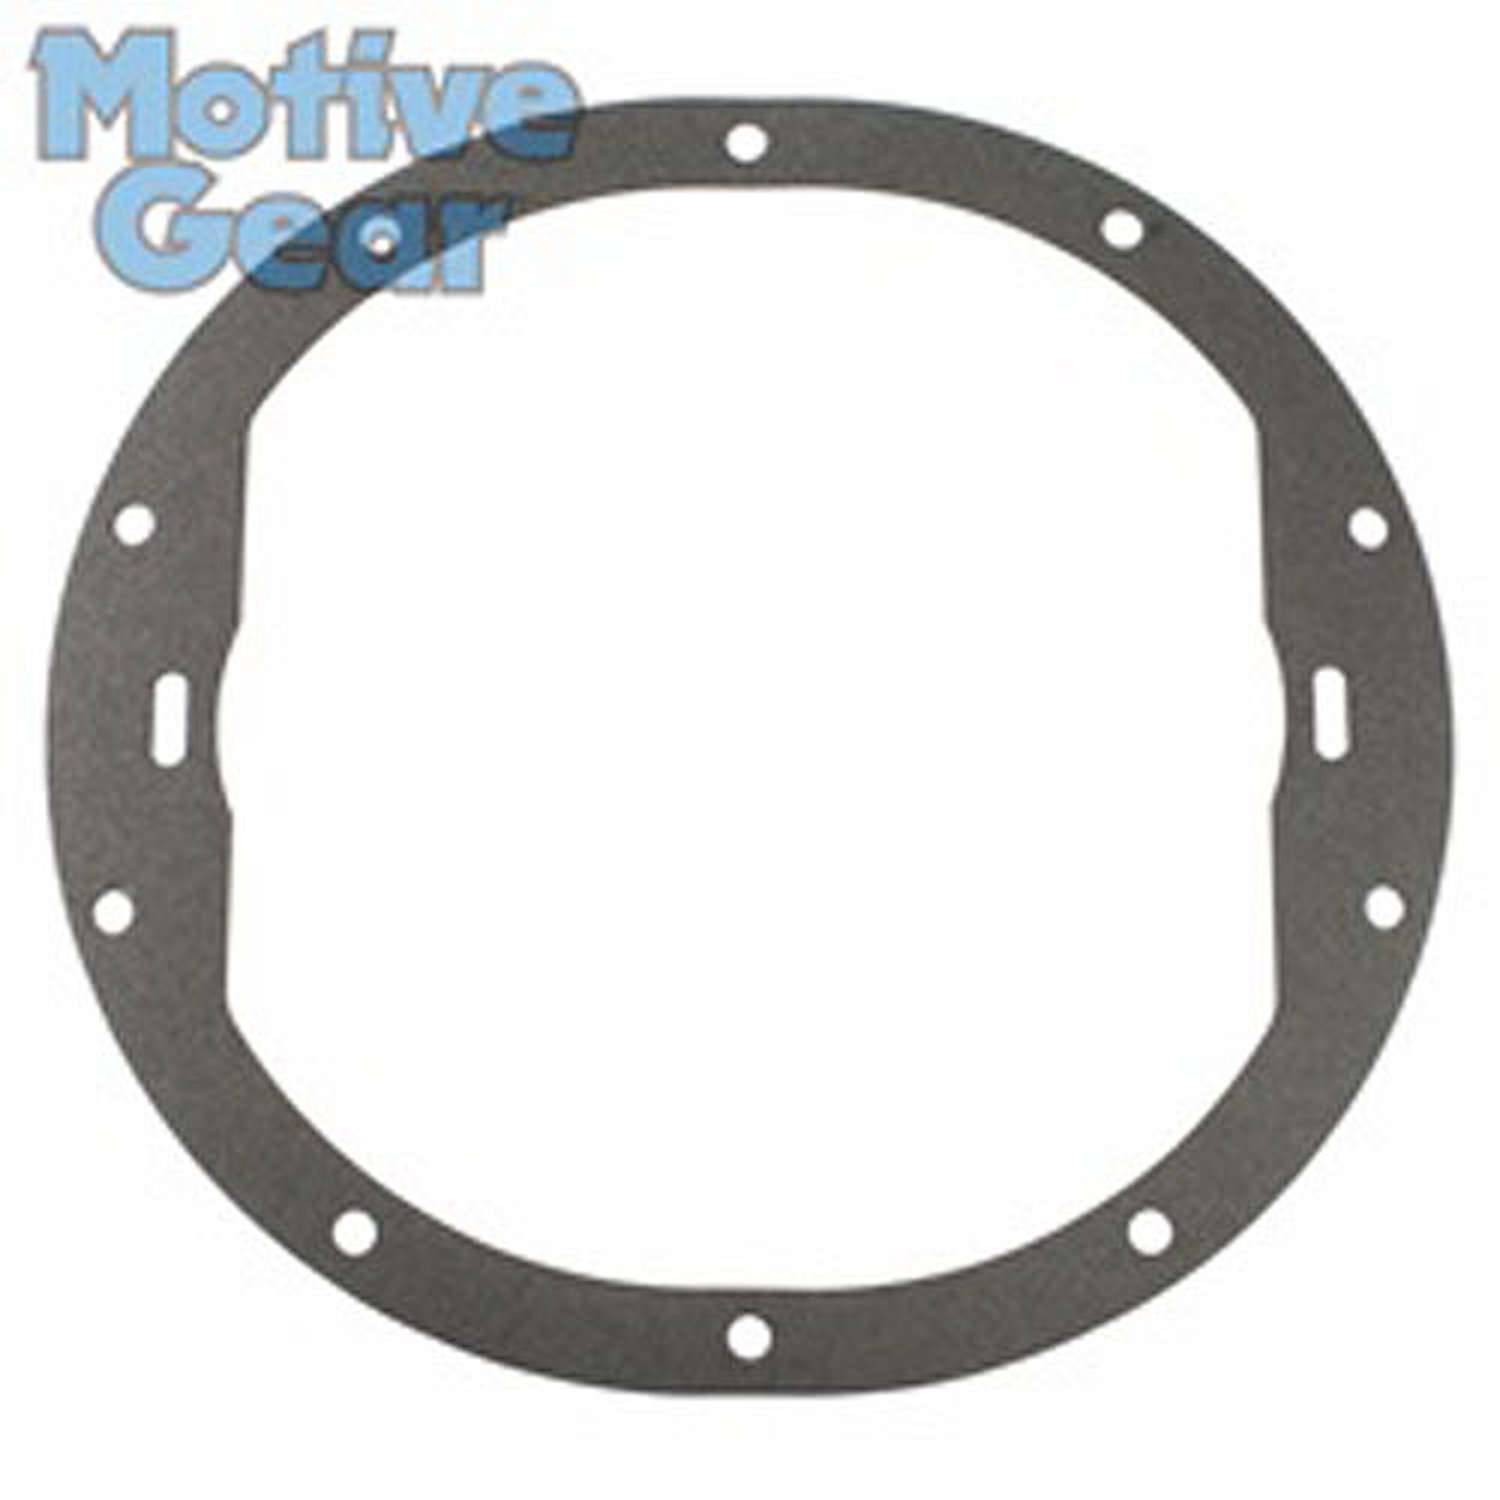 Differential Cover Gasket for GM 8.2 in., 8.5